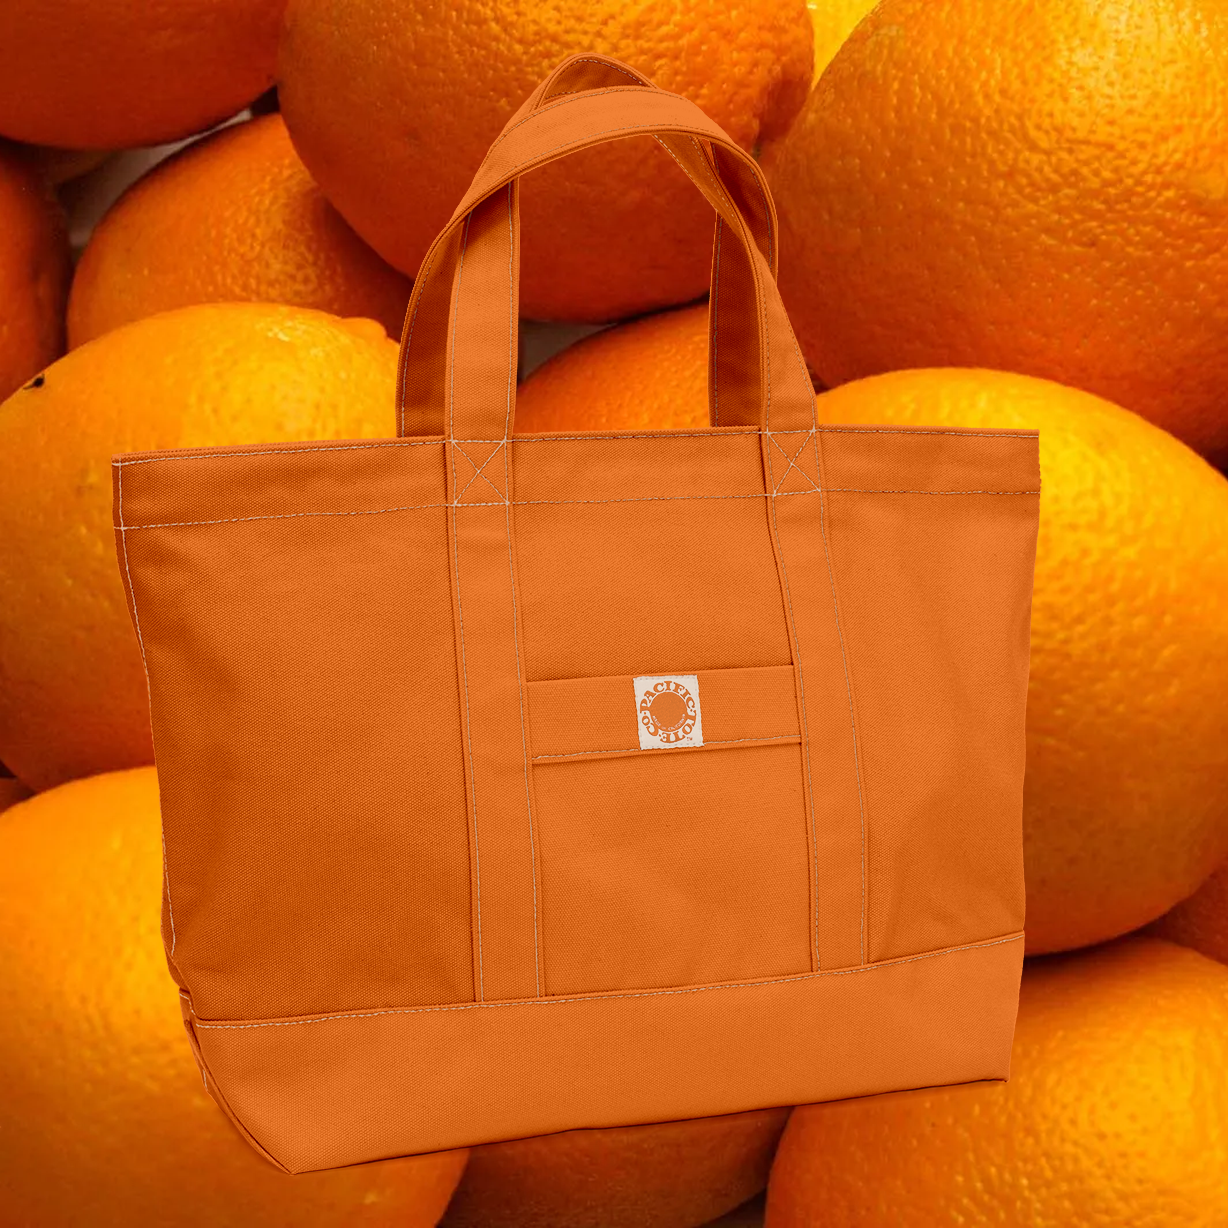 "Big Sur" Zippered Tote